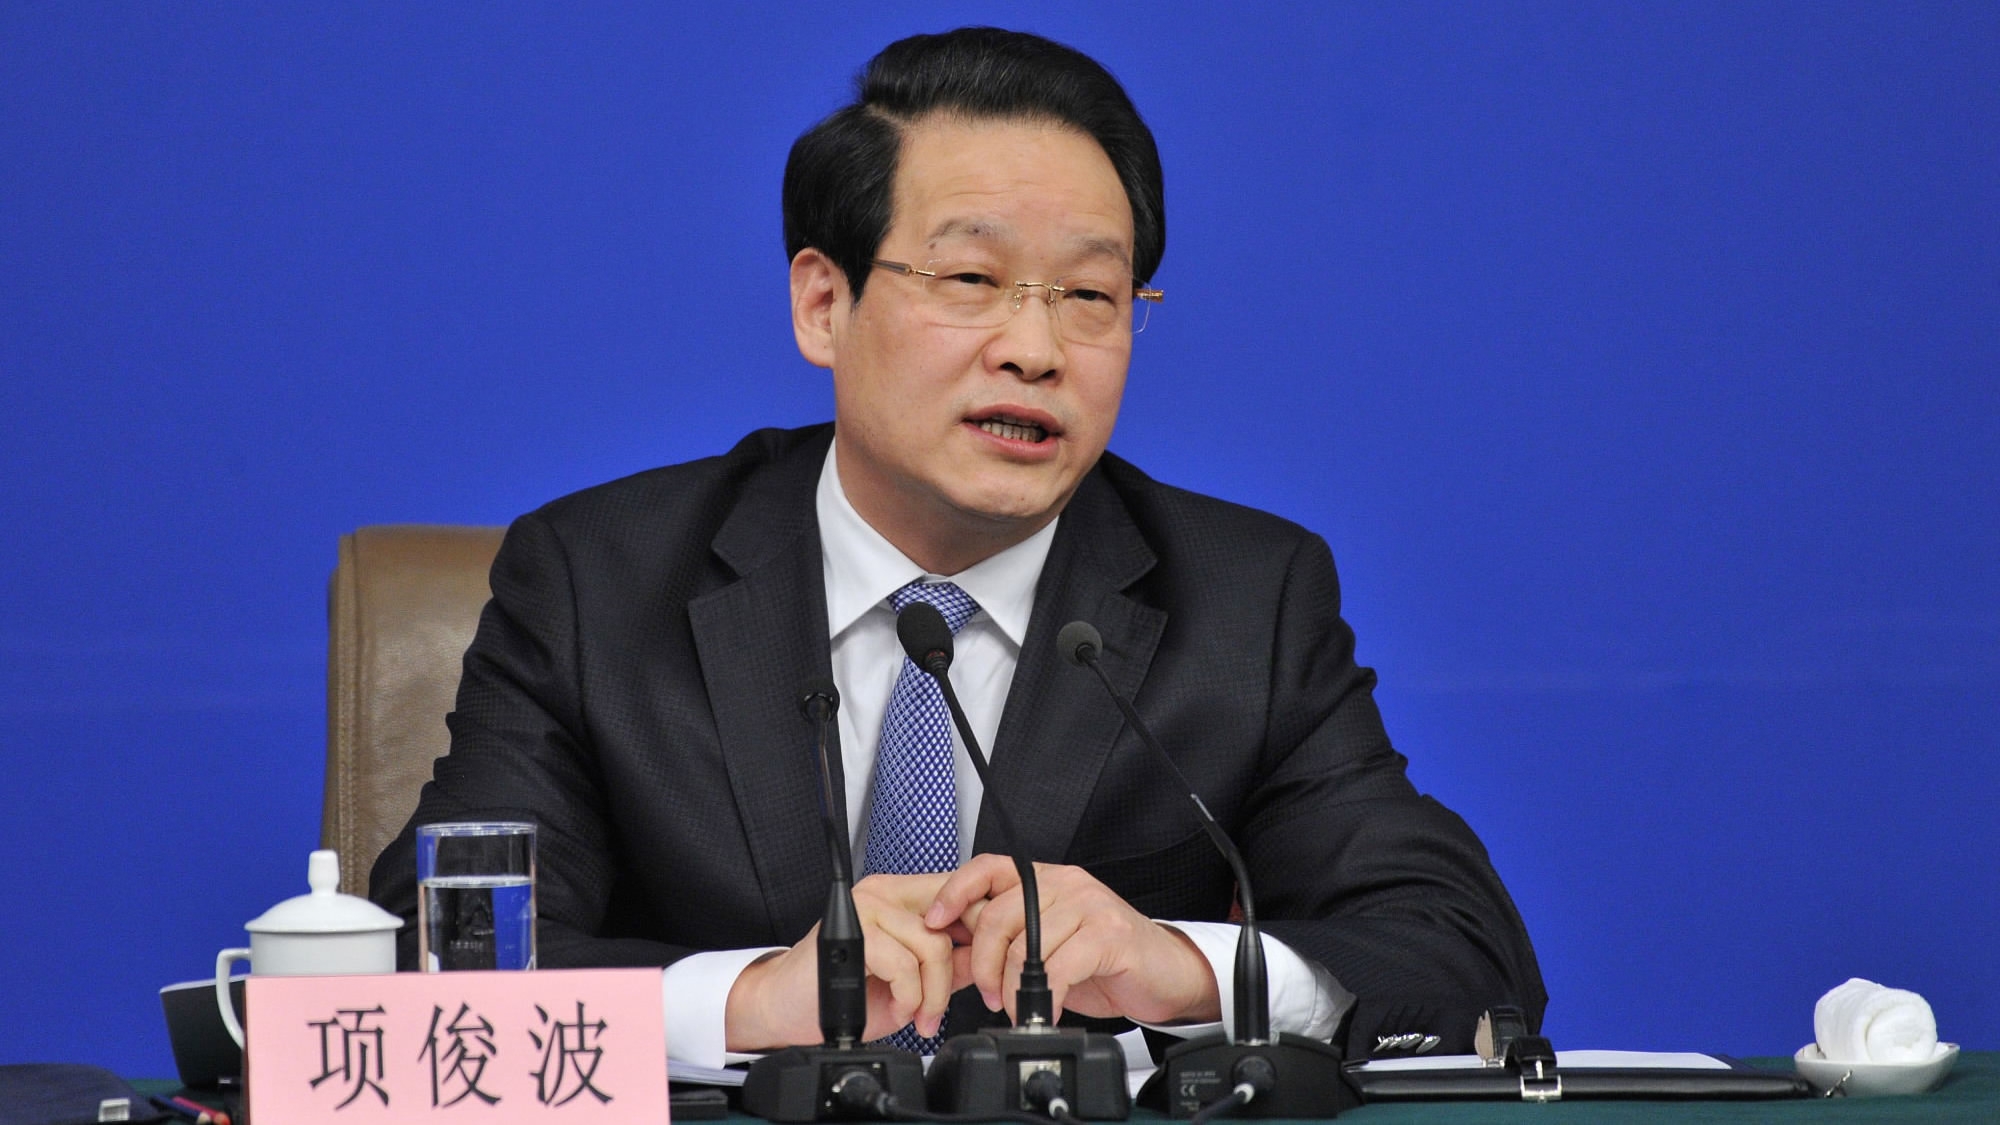 Xiang Junbo, former chairman of the China Insurance Regulatory Commission (CIRC). [File Photo: CGTN]